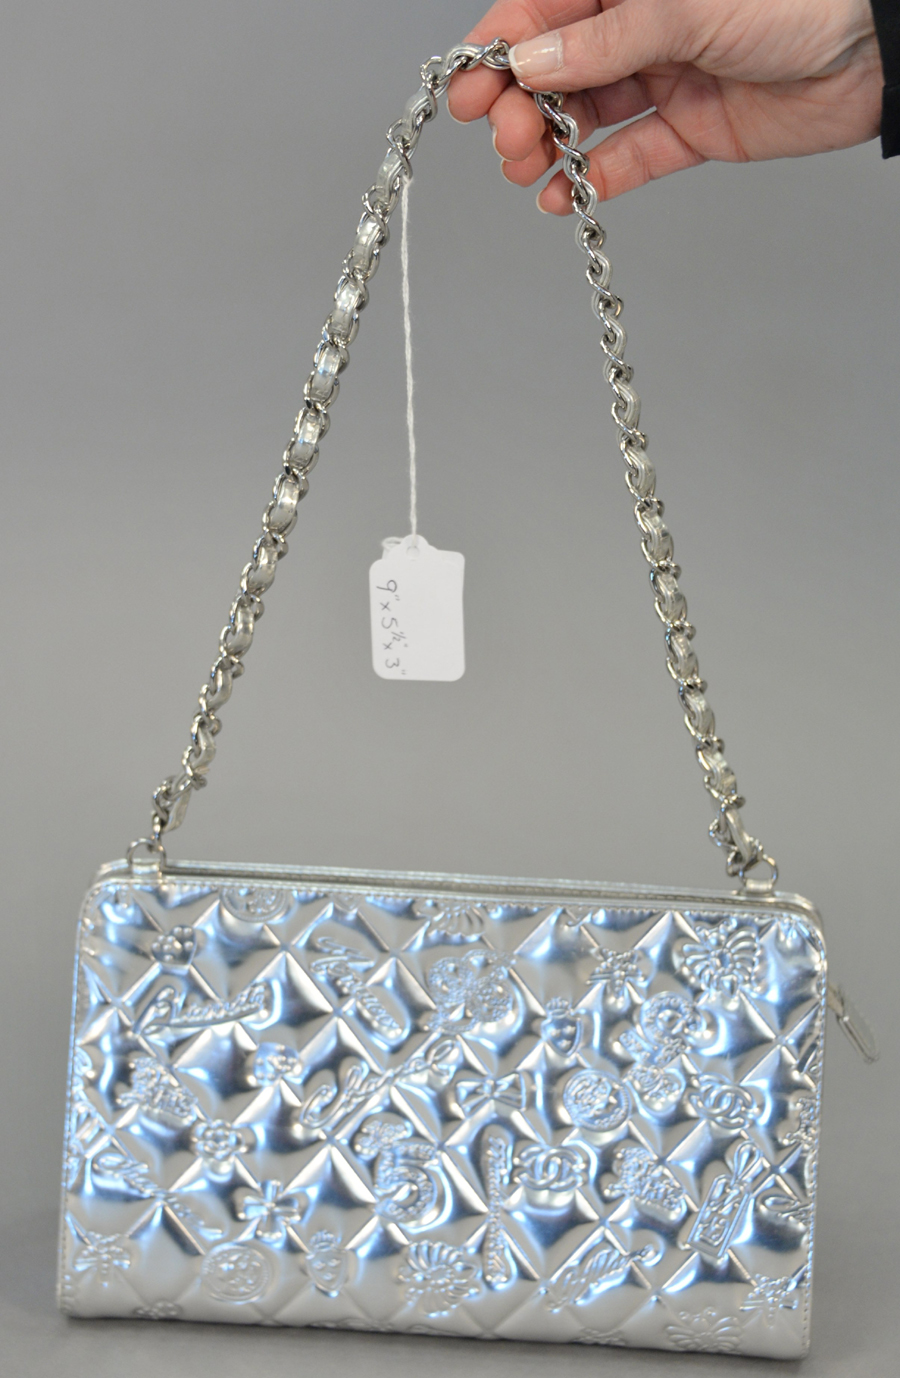 A Chanel quilted metallic silver leather handbag/purse, special edition marked Biarritz, Monaco Paris, Mademoiselle. 9 by 5½ by 3 inches, <br> also did well at $ 2,160.